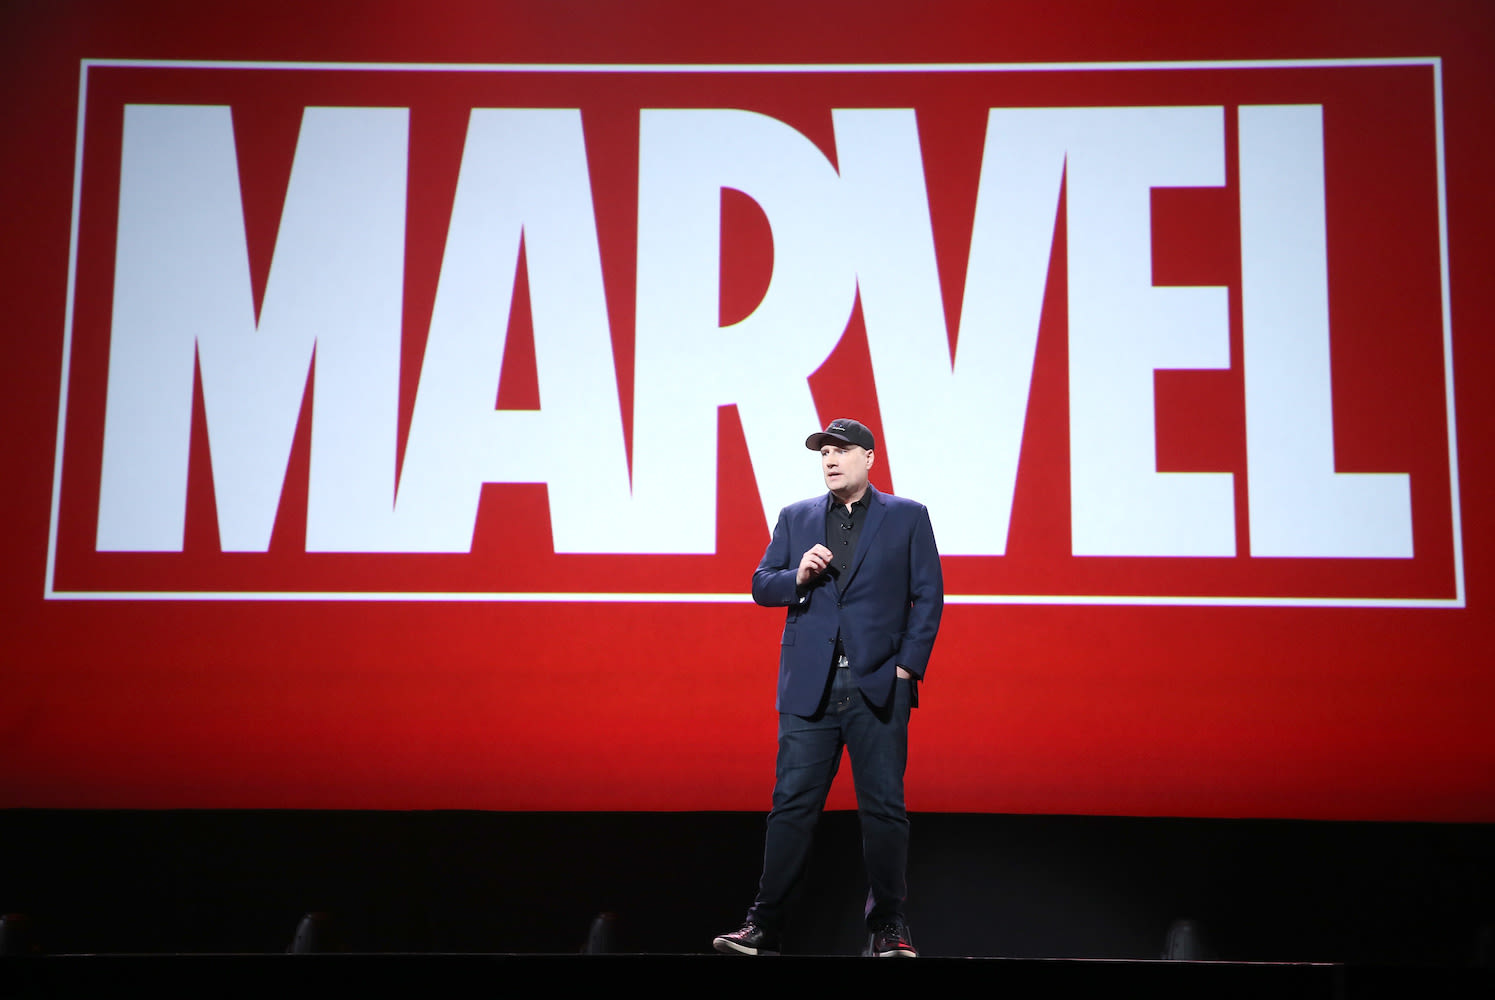 Kevin Feige Defends Sequels as an ‘Absolute Pillar of the Industry,’ Says Marvel First Thought ‘Avengers’ Could Only Work as Animated Film